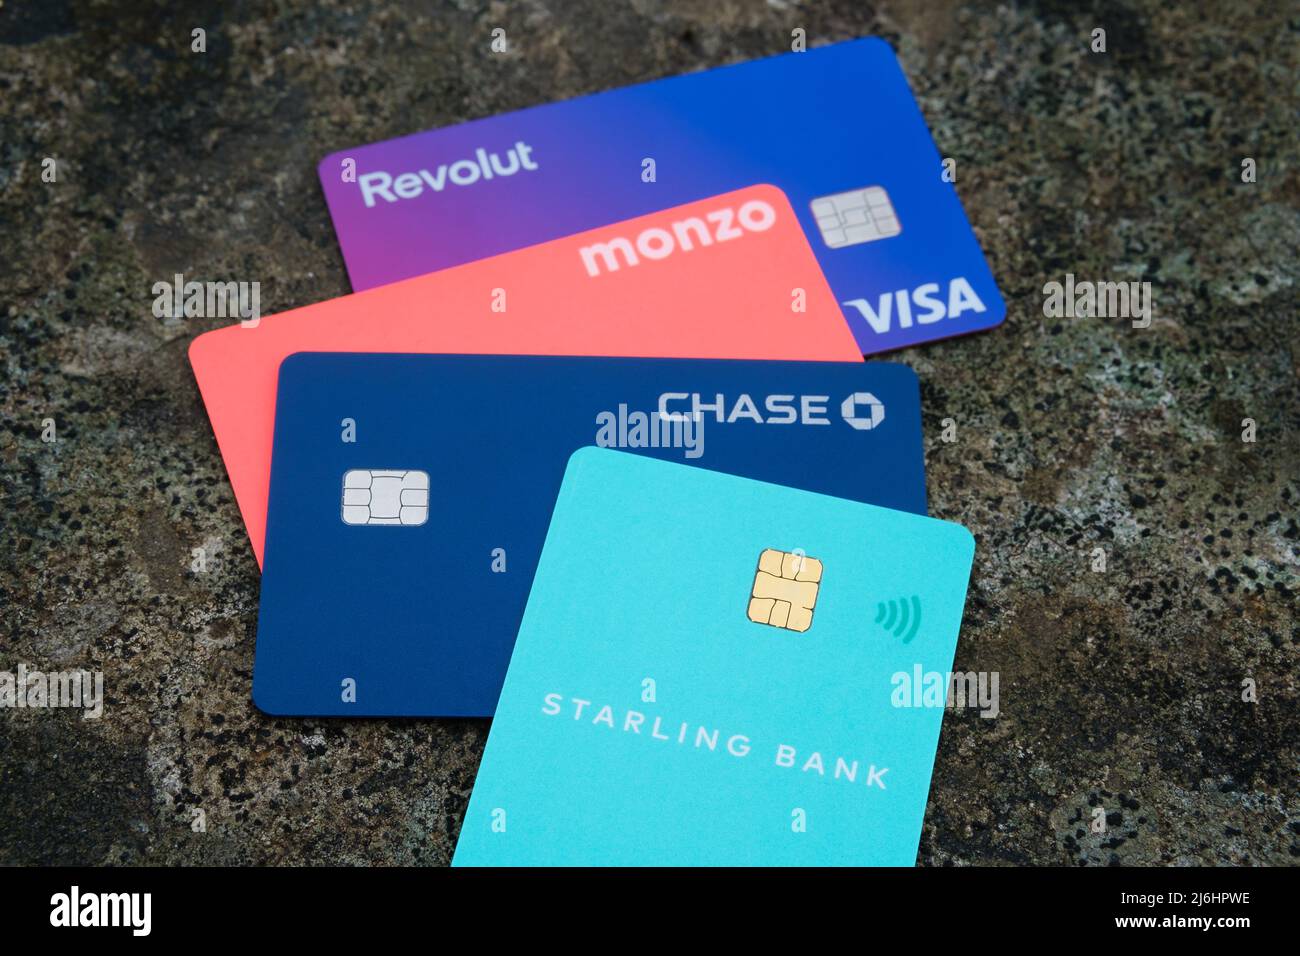 Starling bank, Chase, Monzo and Revolut debit cards. Digital only (virtual) banks. Concept for competition in fintech. Stafford, United Kingdom, May 2 Stock Photo